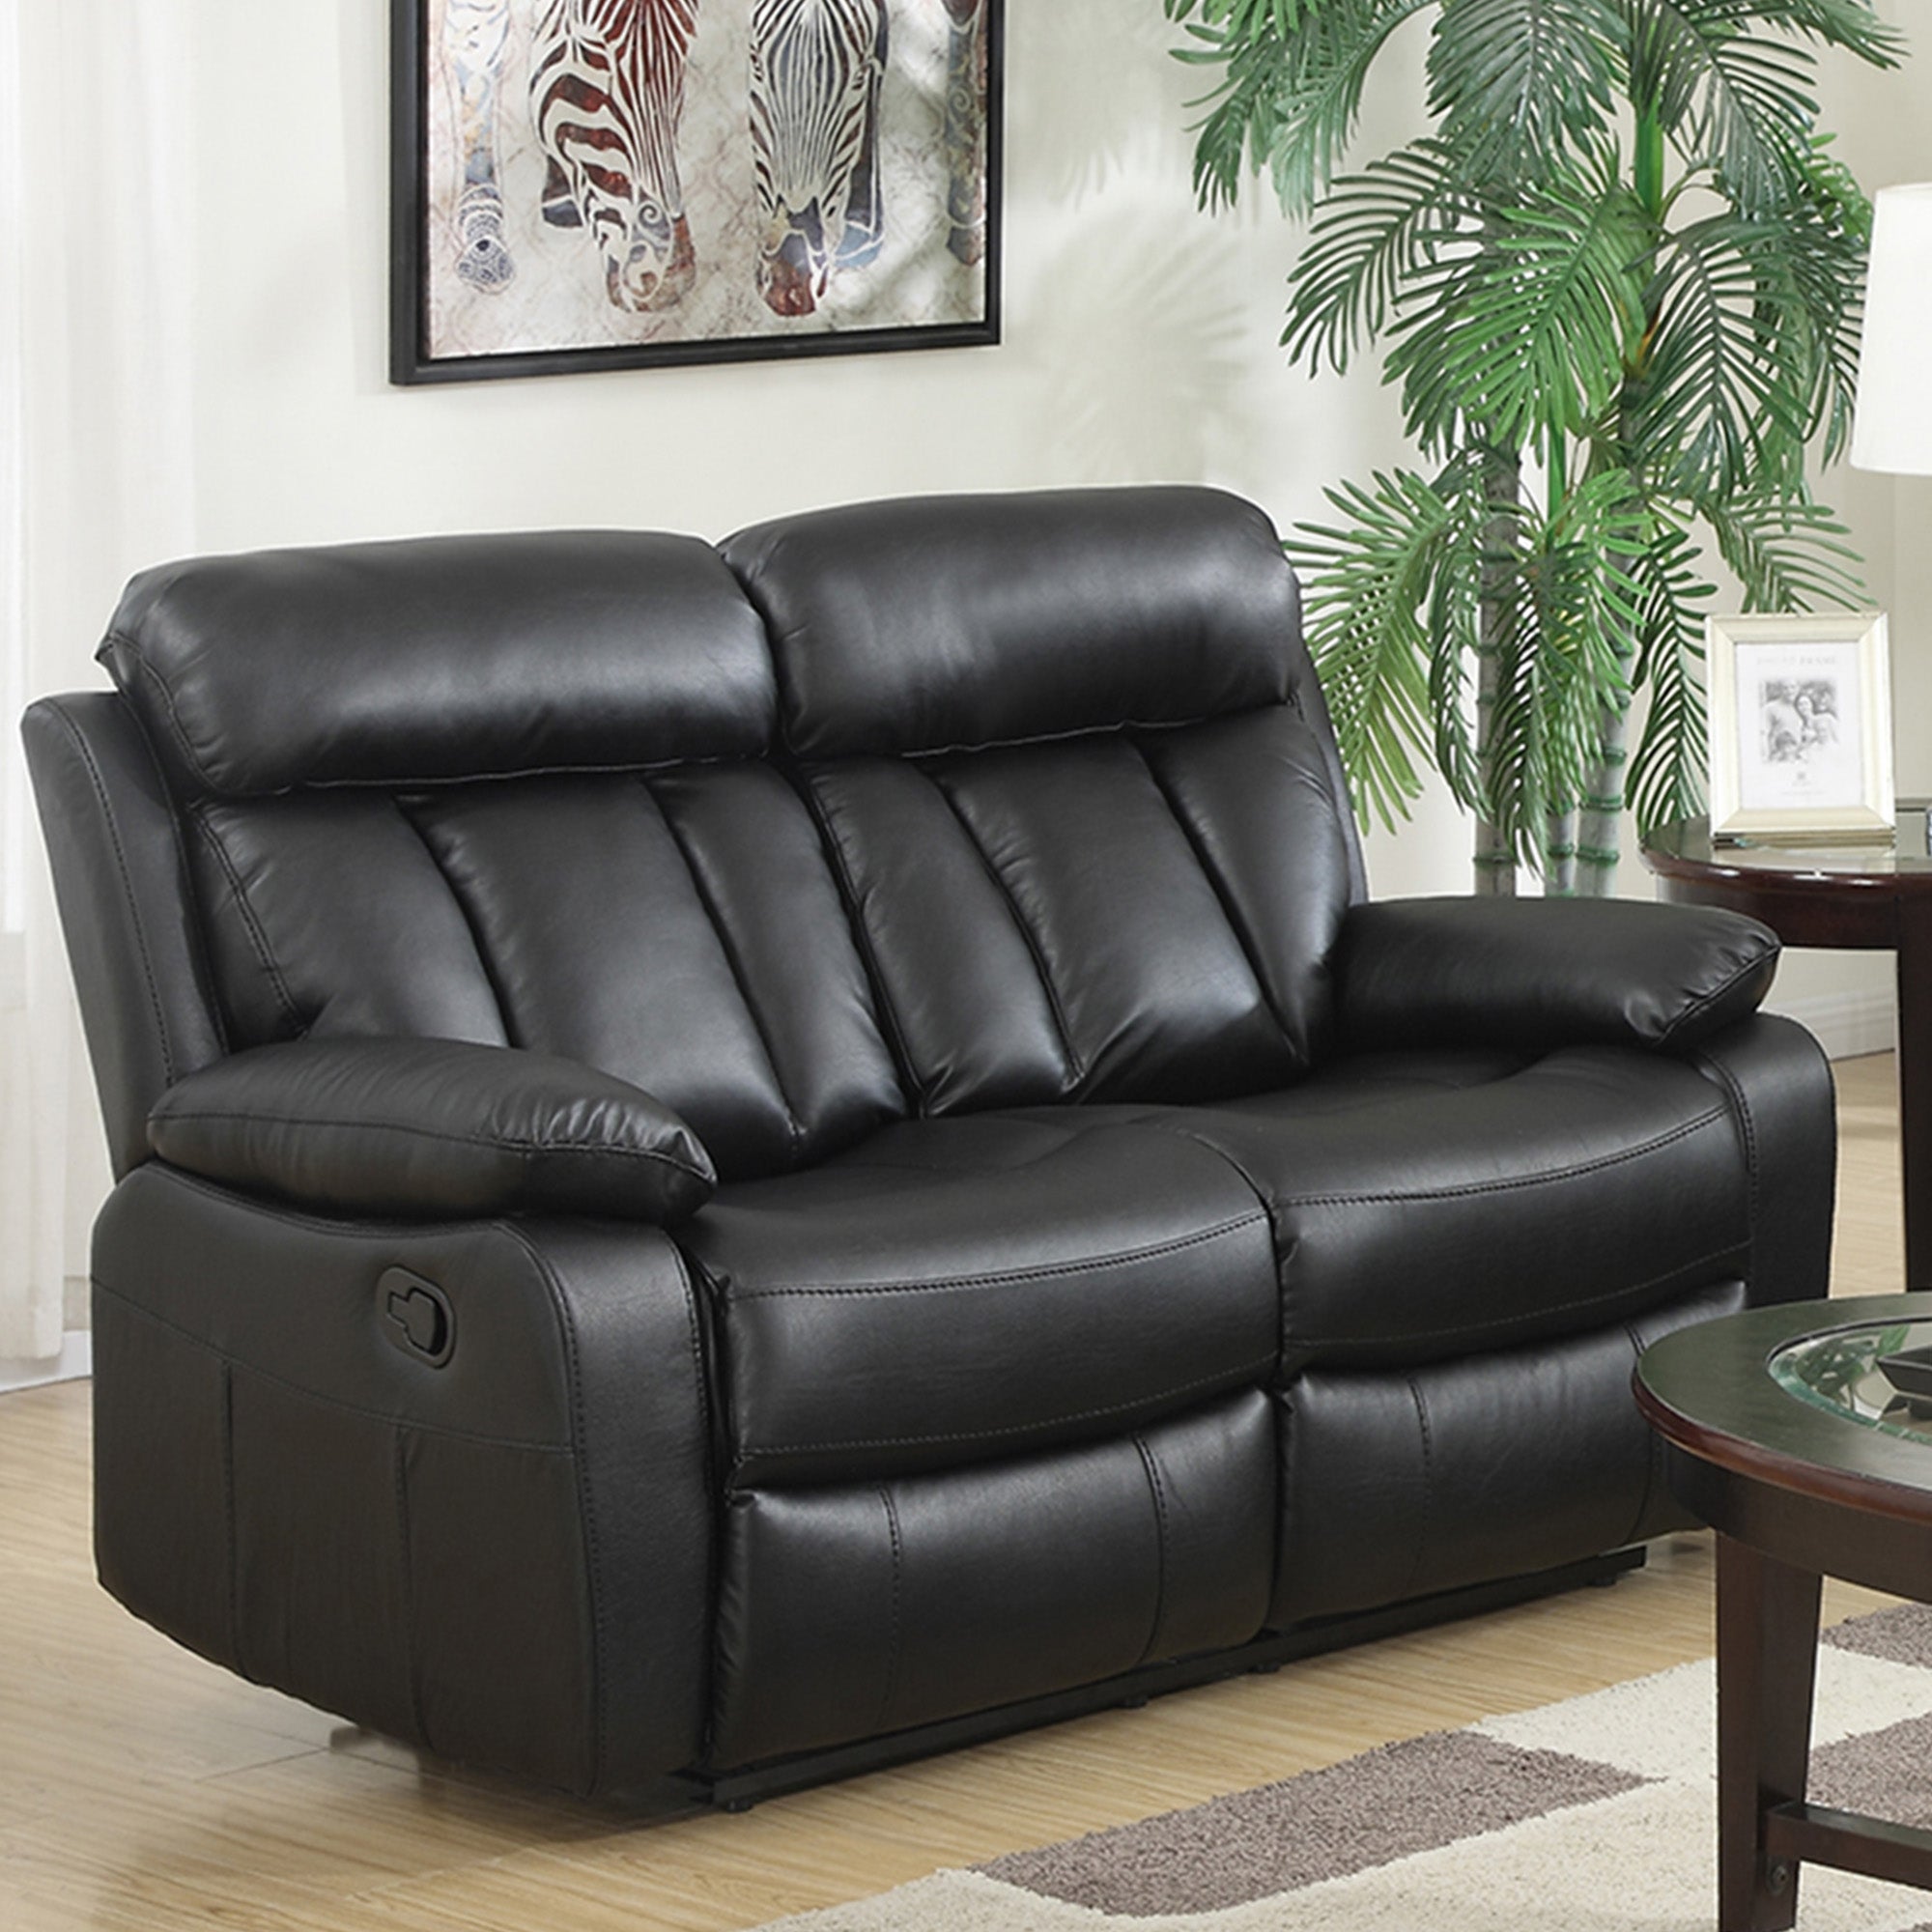 Merrion Faux Leather 2 Seater Manual Recliner Sofa